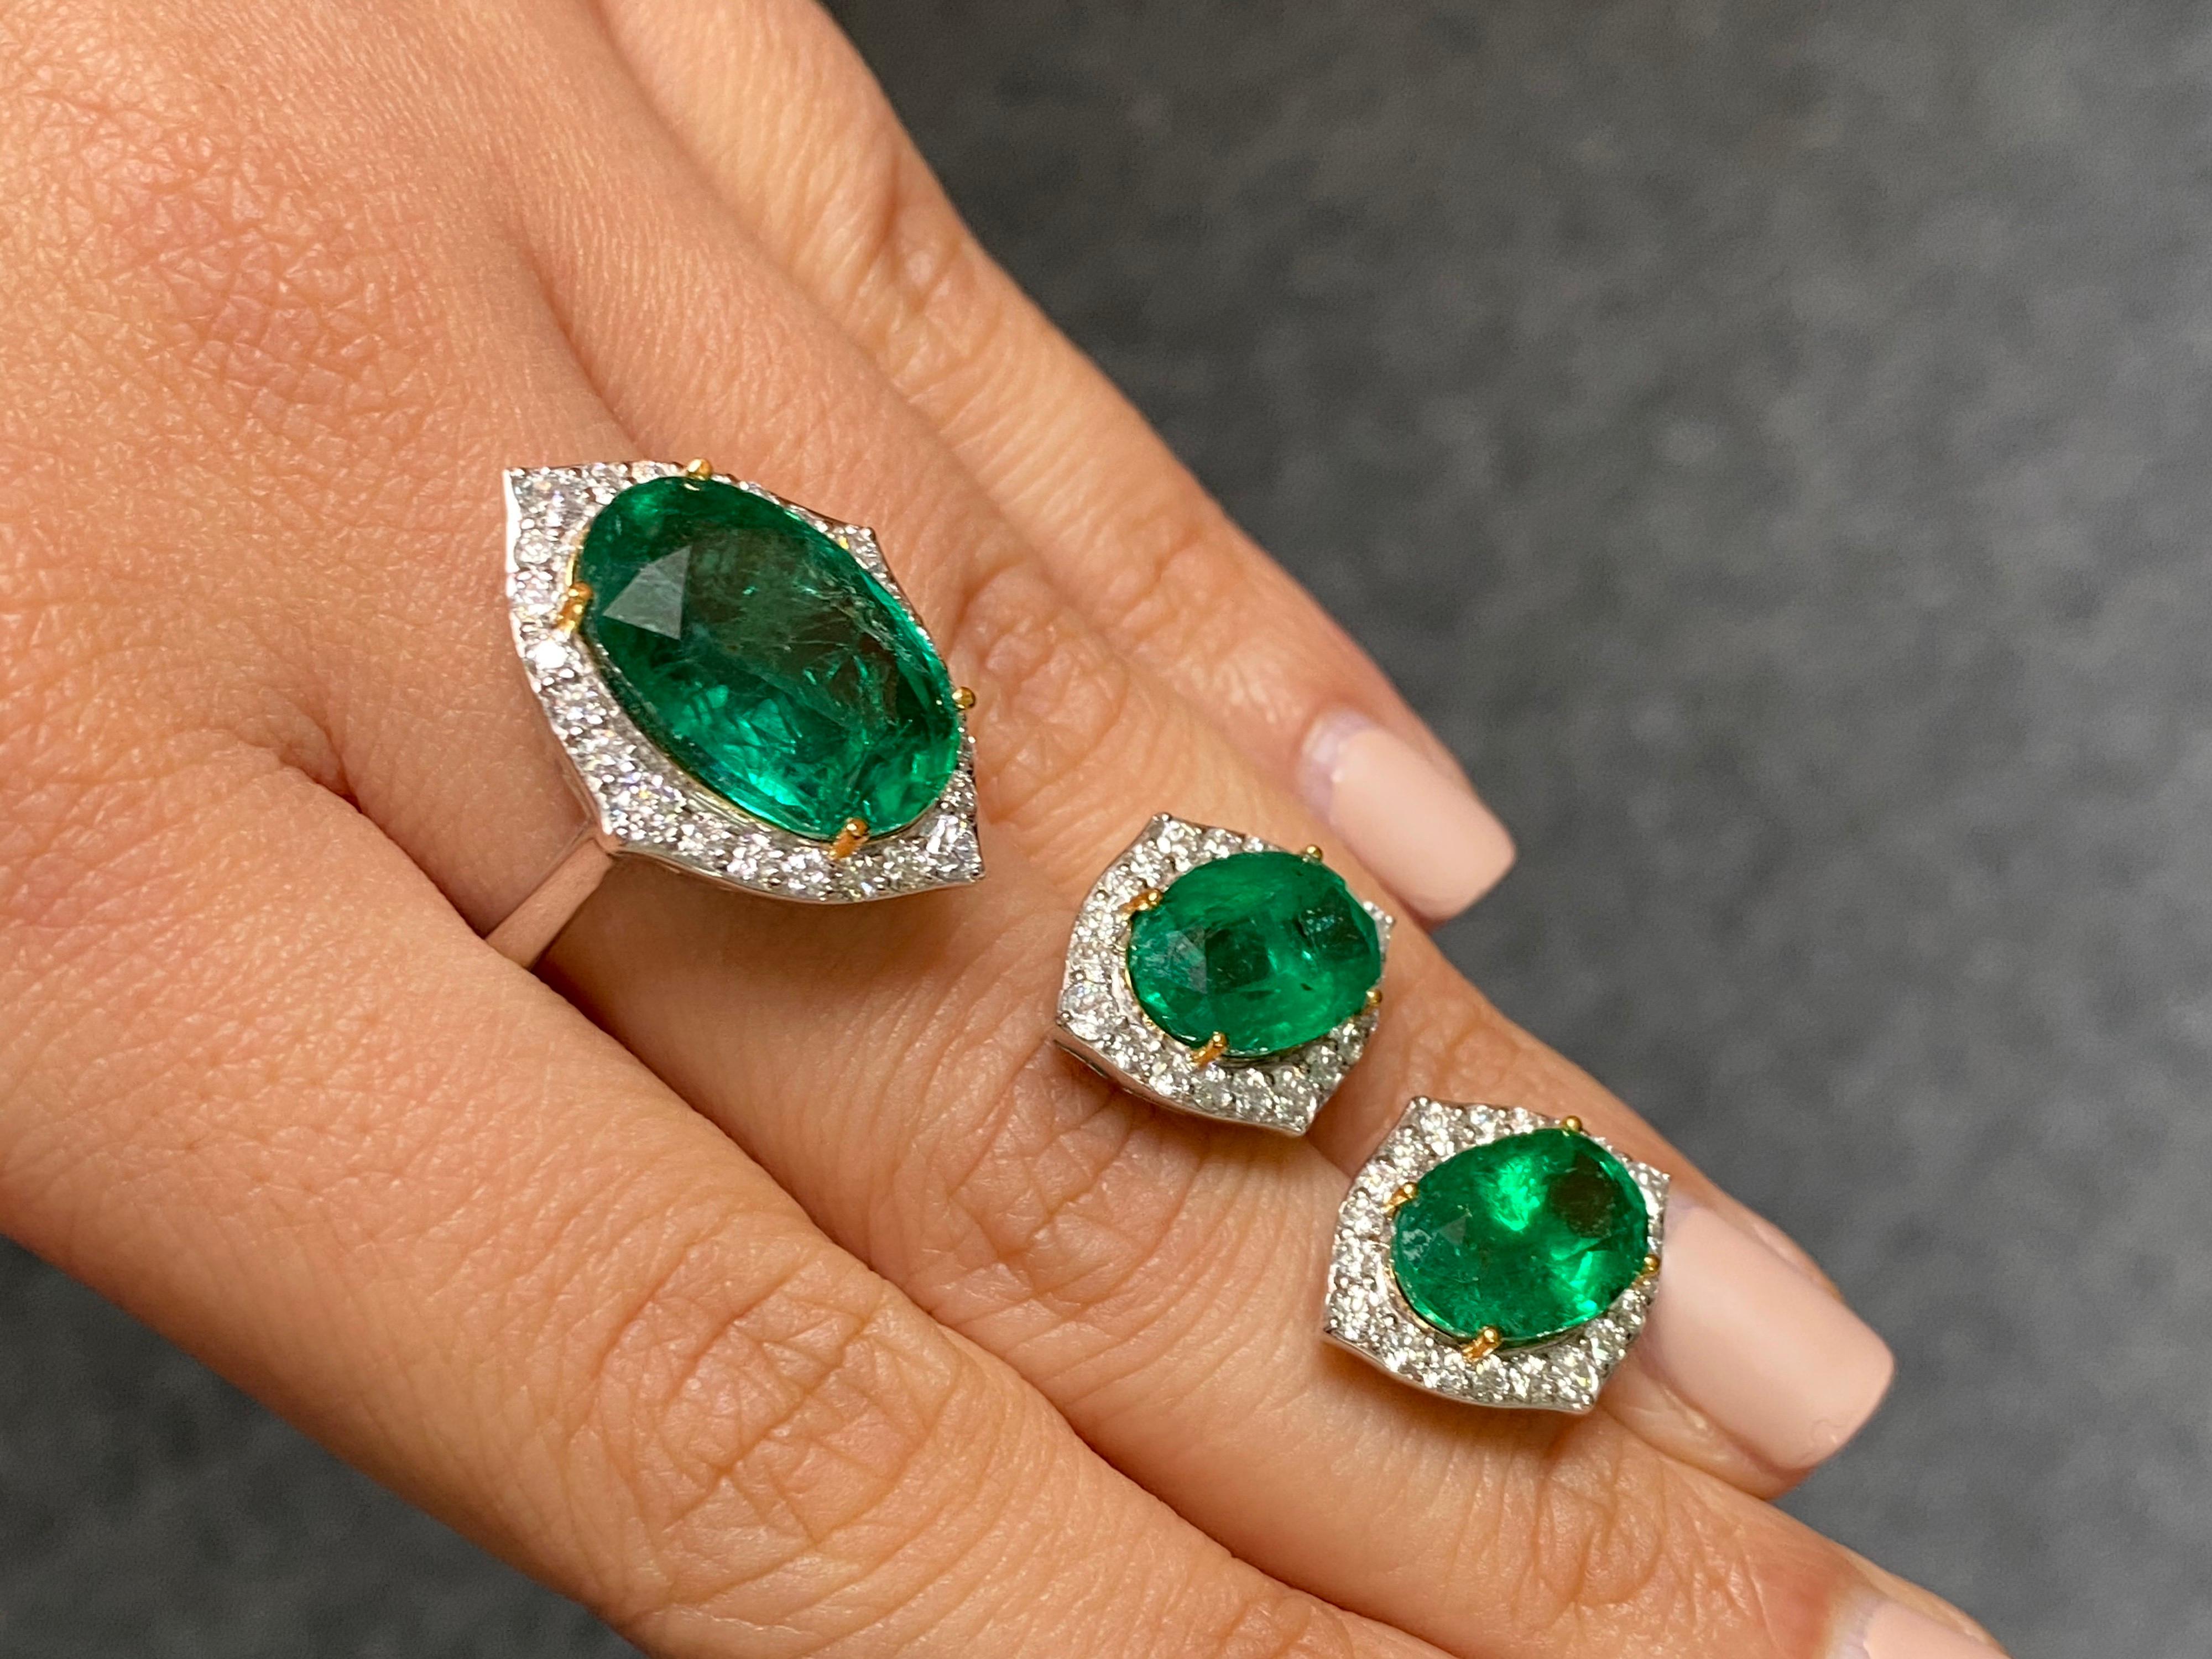 A stunning pair of 7.37 carats Zambian Emerald studs with 1.23 carats White Diamonds, and a matching cocktail ring with 8.52 carats oval Zambian Emerald and 0.82 carat colorless White Diamonds. The Emeralds are transparent with amazing luster and